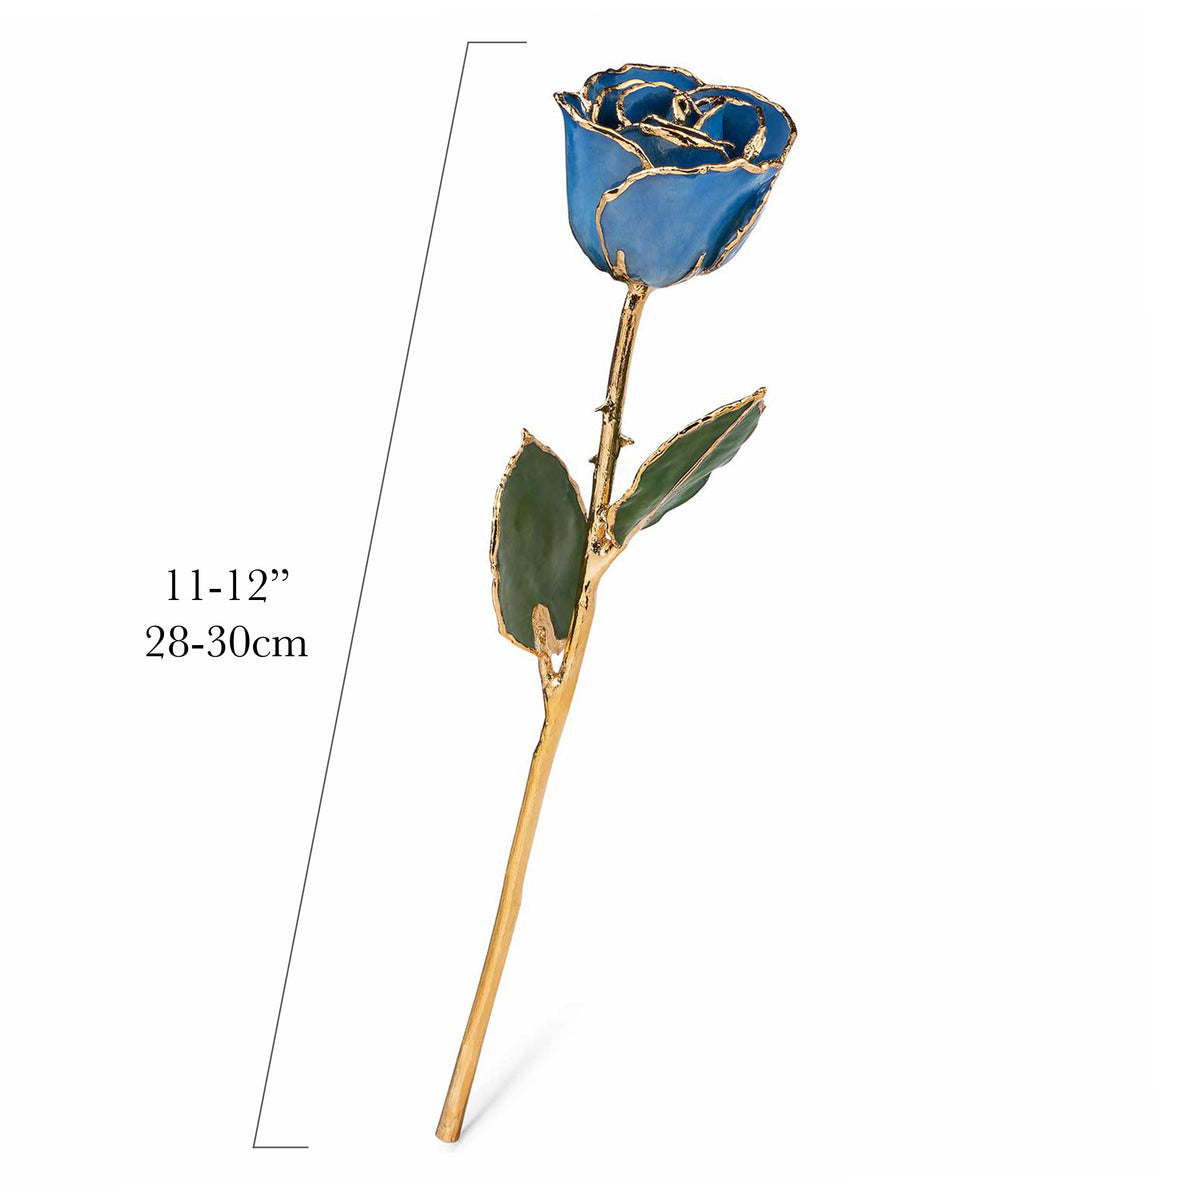 24K Gold Trimmed Forever Rose with Blue Petals with View of Stem, Leaves, and Rose Petals and Showing Detail of Gold Trim and measurements